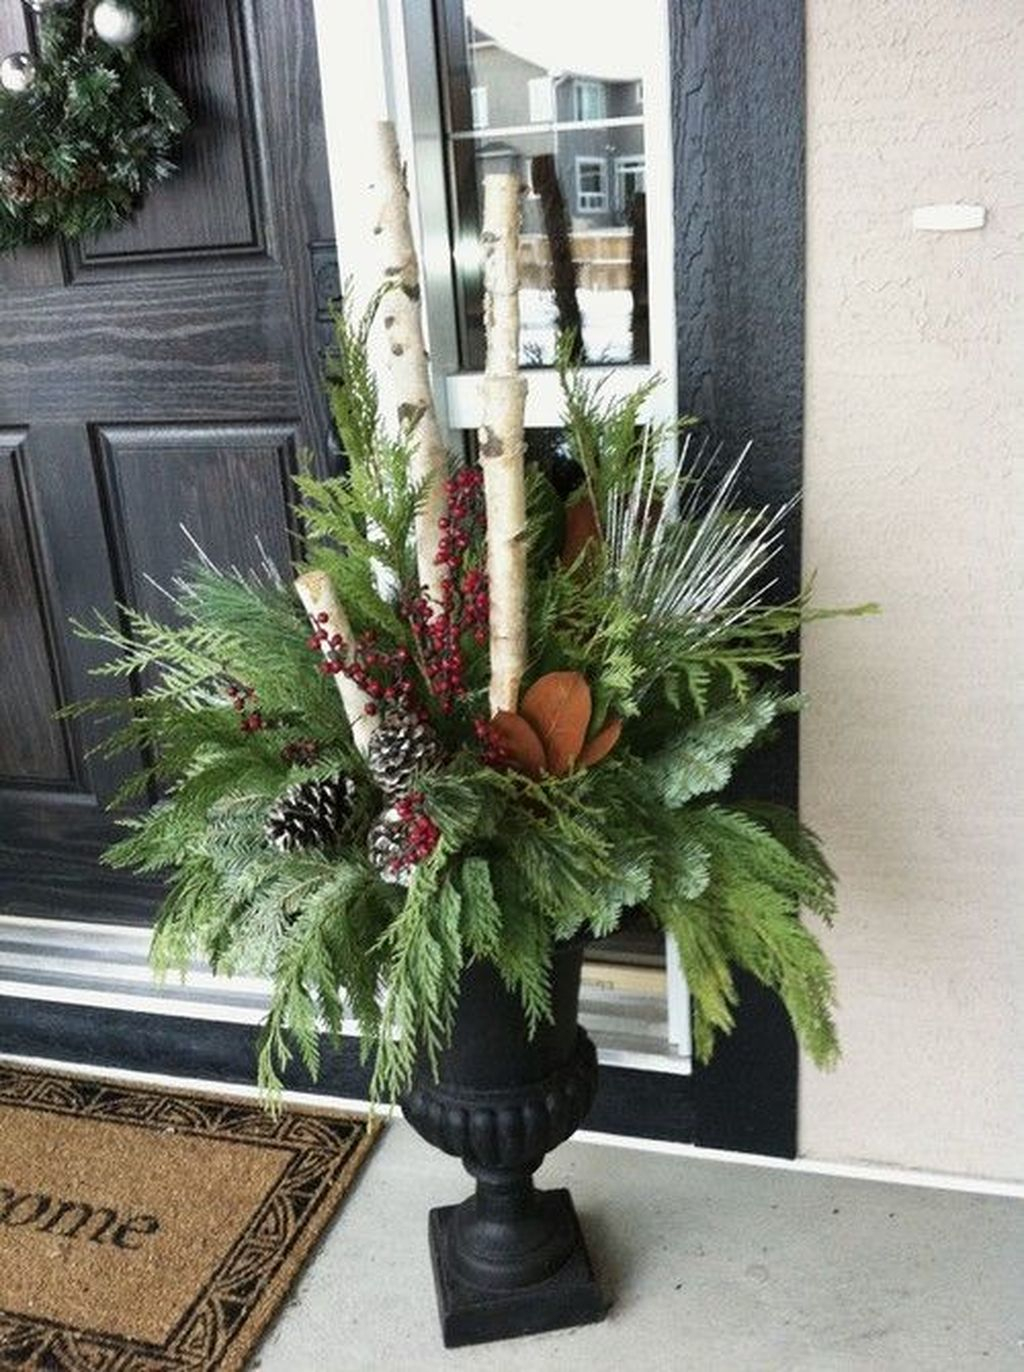 Marvelous Outdoor Holiday Planter Ideas To Beauty Porch Décor 03